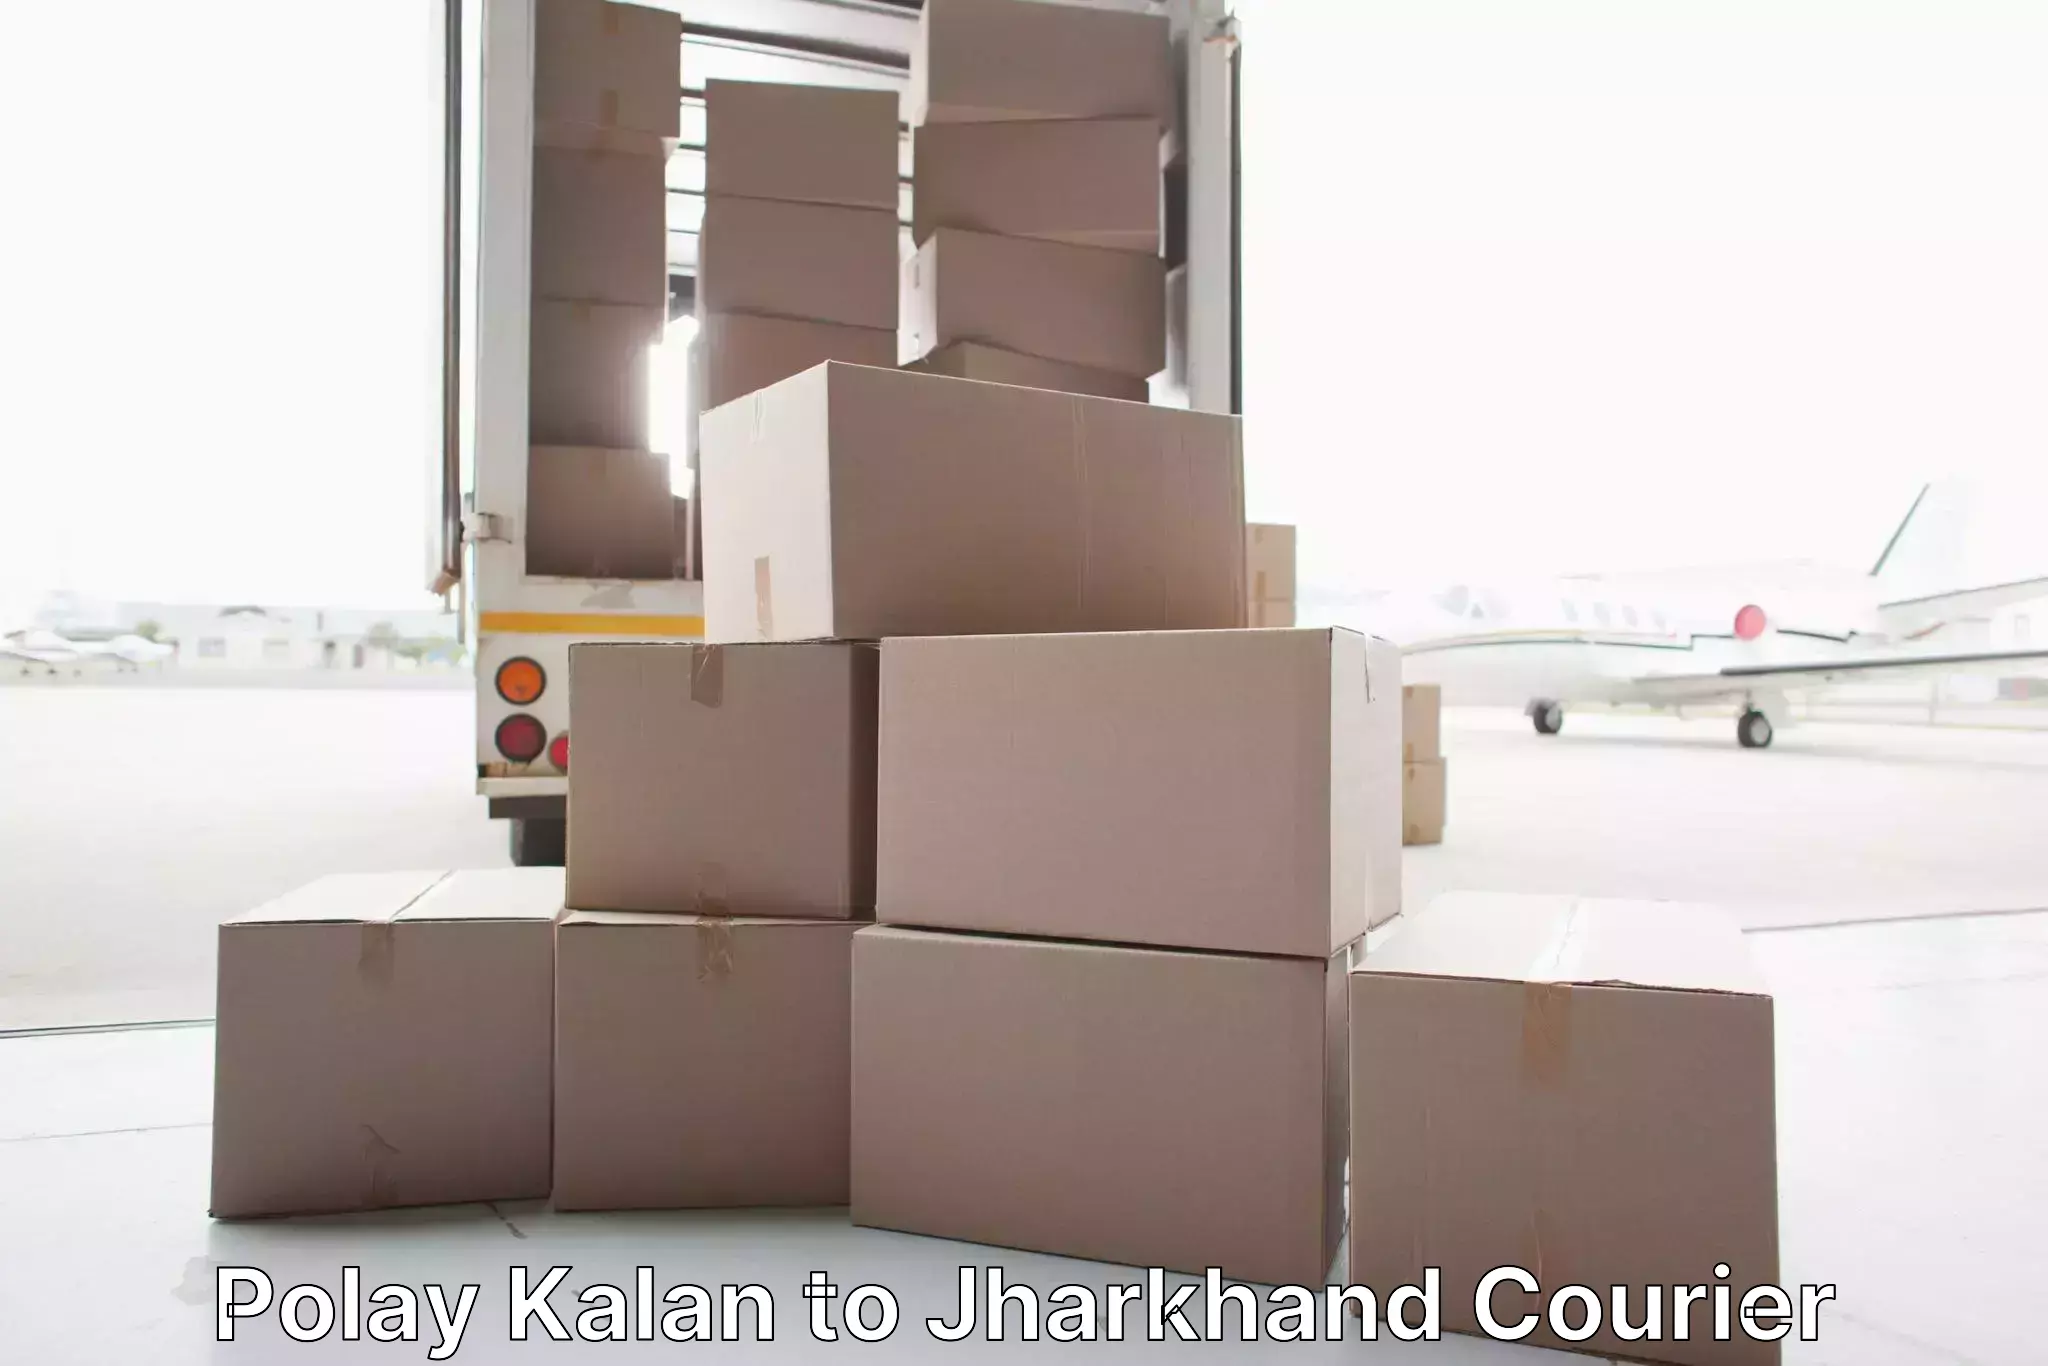 Moving and handling services Polay Kalan to Gumia